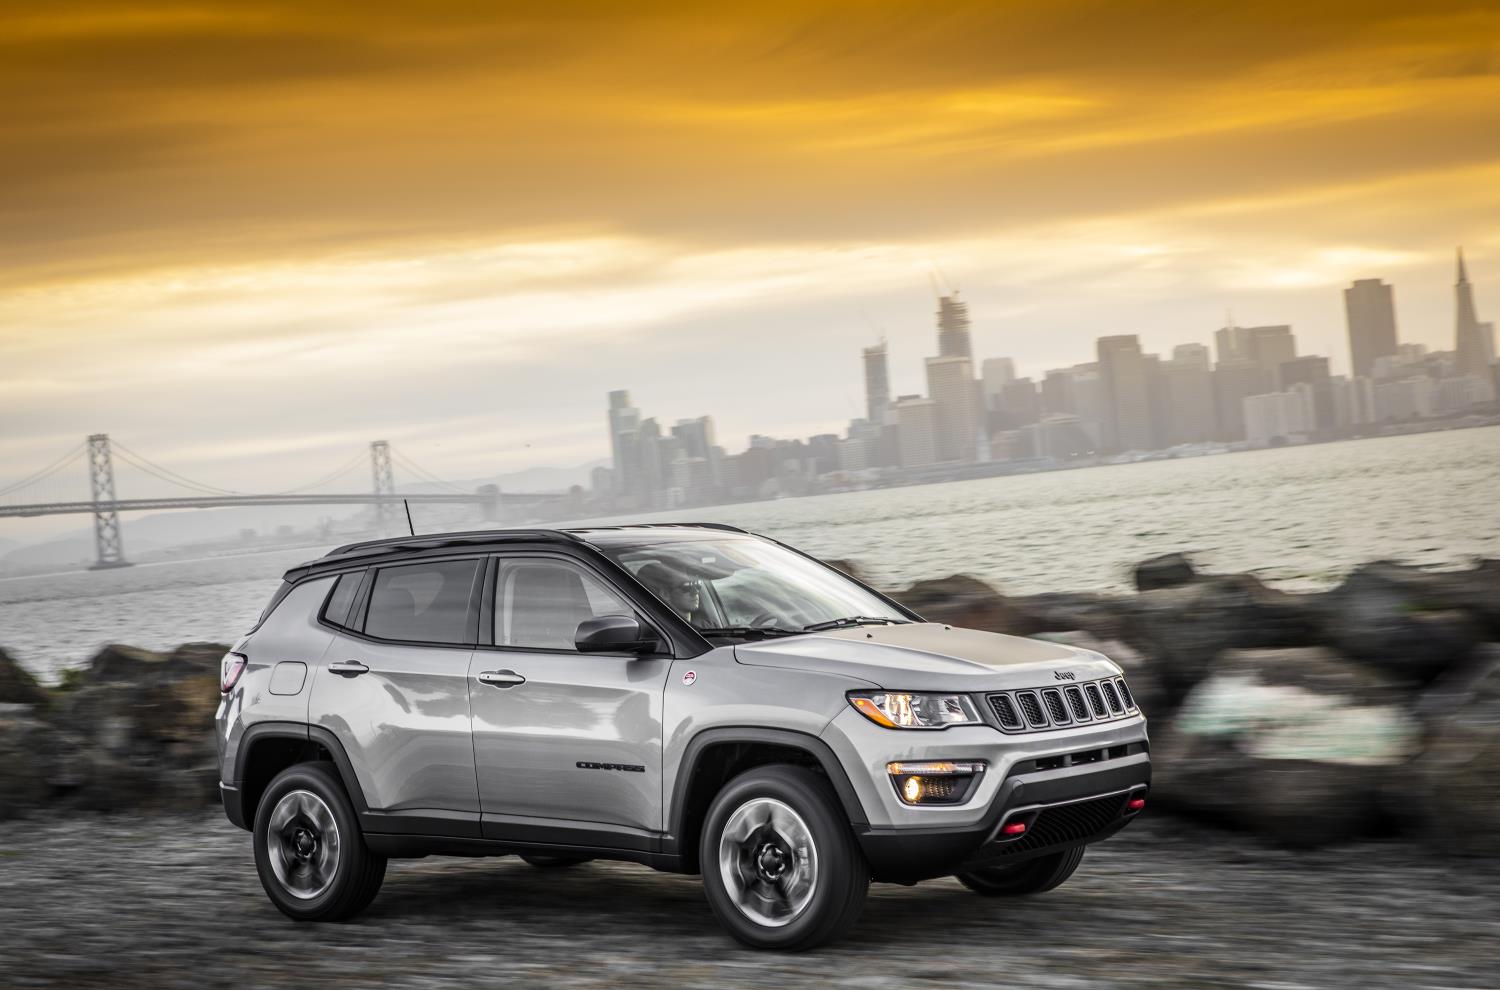 Jeep Compass, one of Jeep's top selling vehicles in calendar year 2017